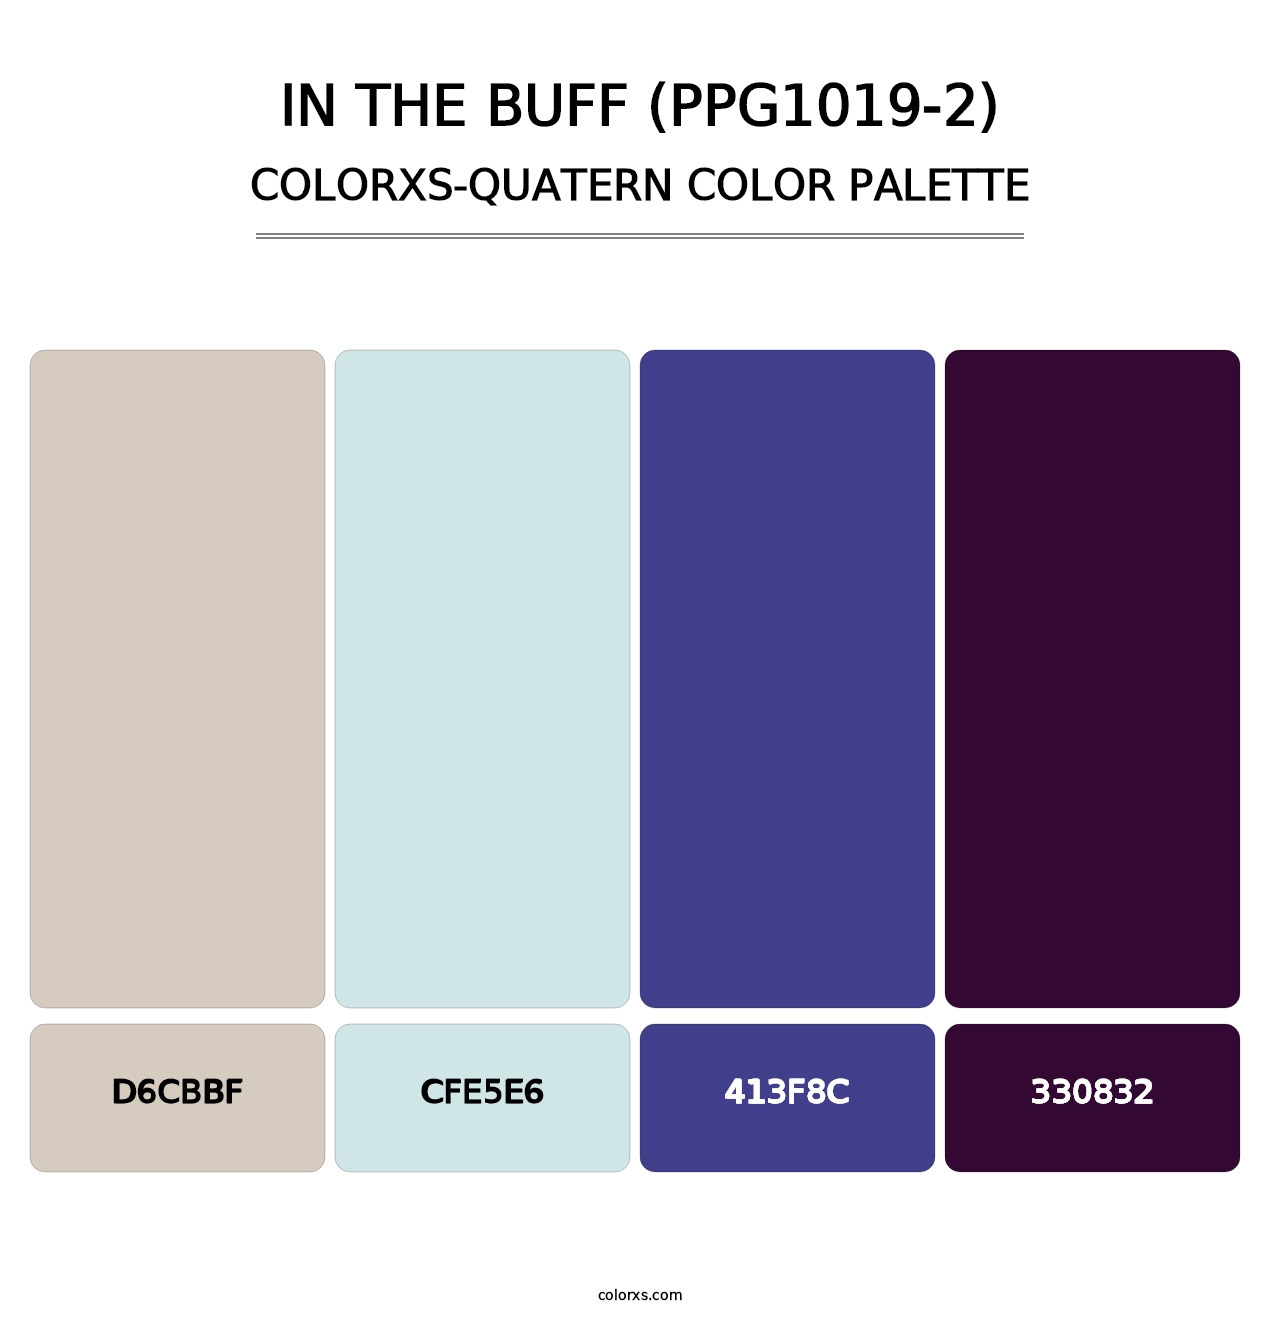 In The Buff (PPG1019-2) - Colorxs Quatern Palette